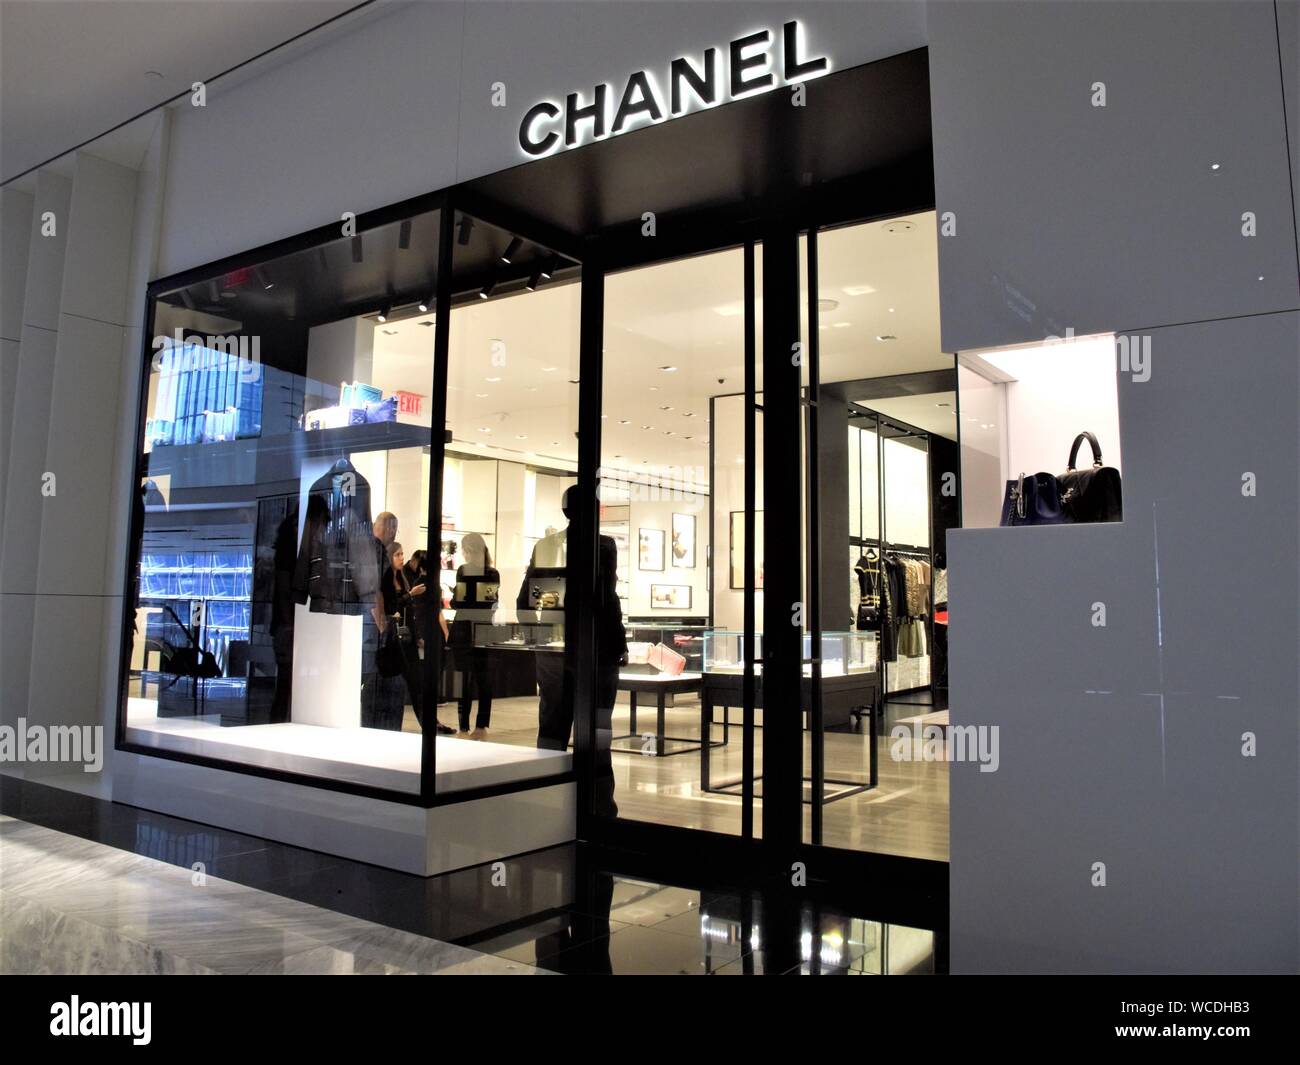 Chanel boutique to come to Westport's Main Street